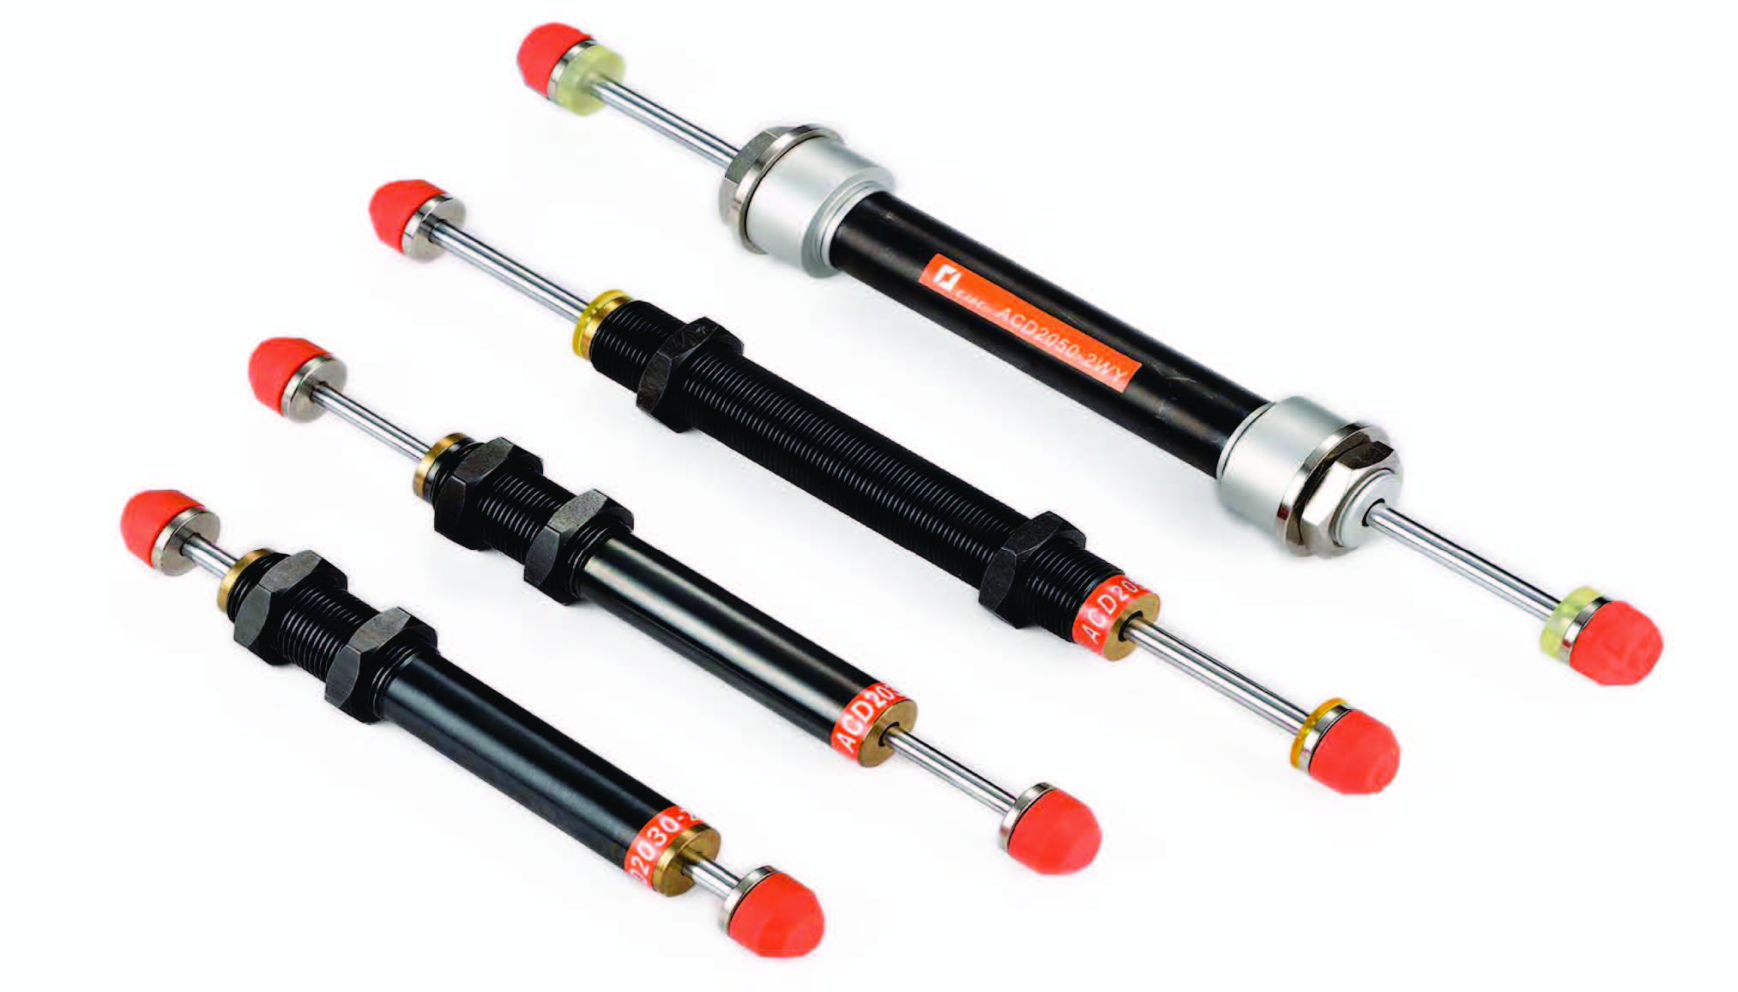 https://eurotec.com.tr/wp-content/uploads/2020/10/ACD-Twin-shock-absorber-1-1.png